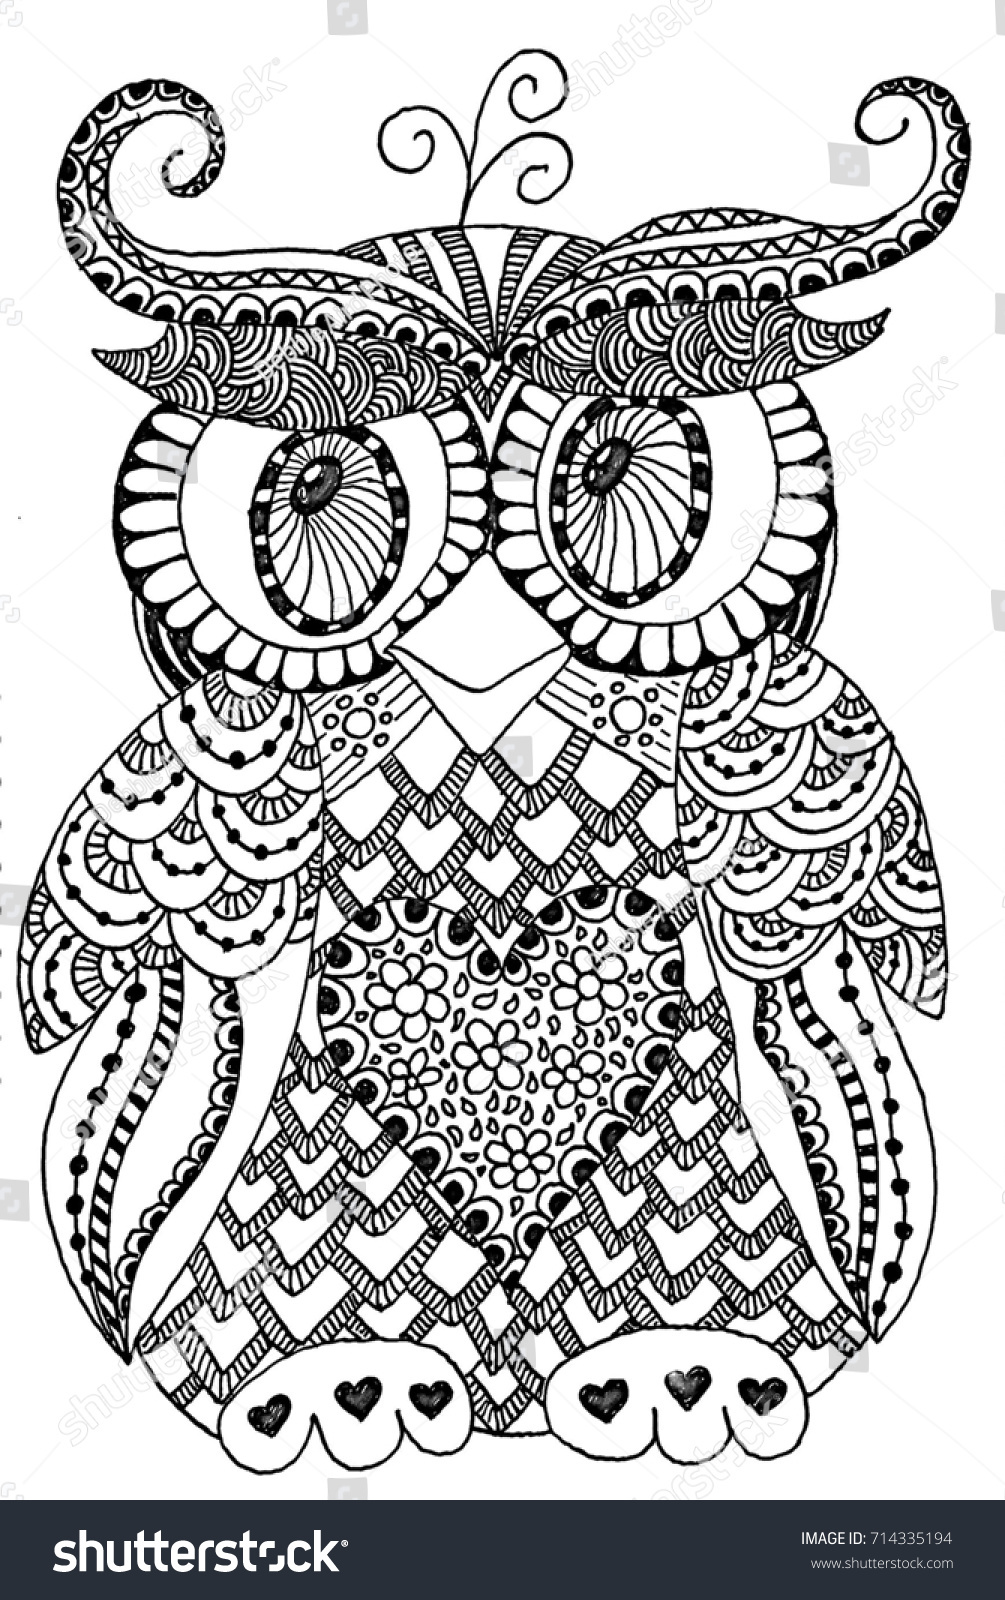 Cute Owl Doodle Art Coloring Page Stock Illustration 714335194